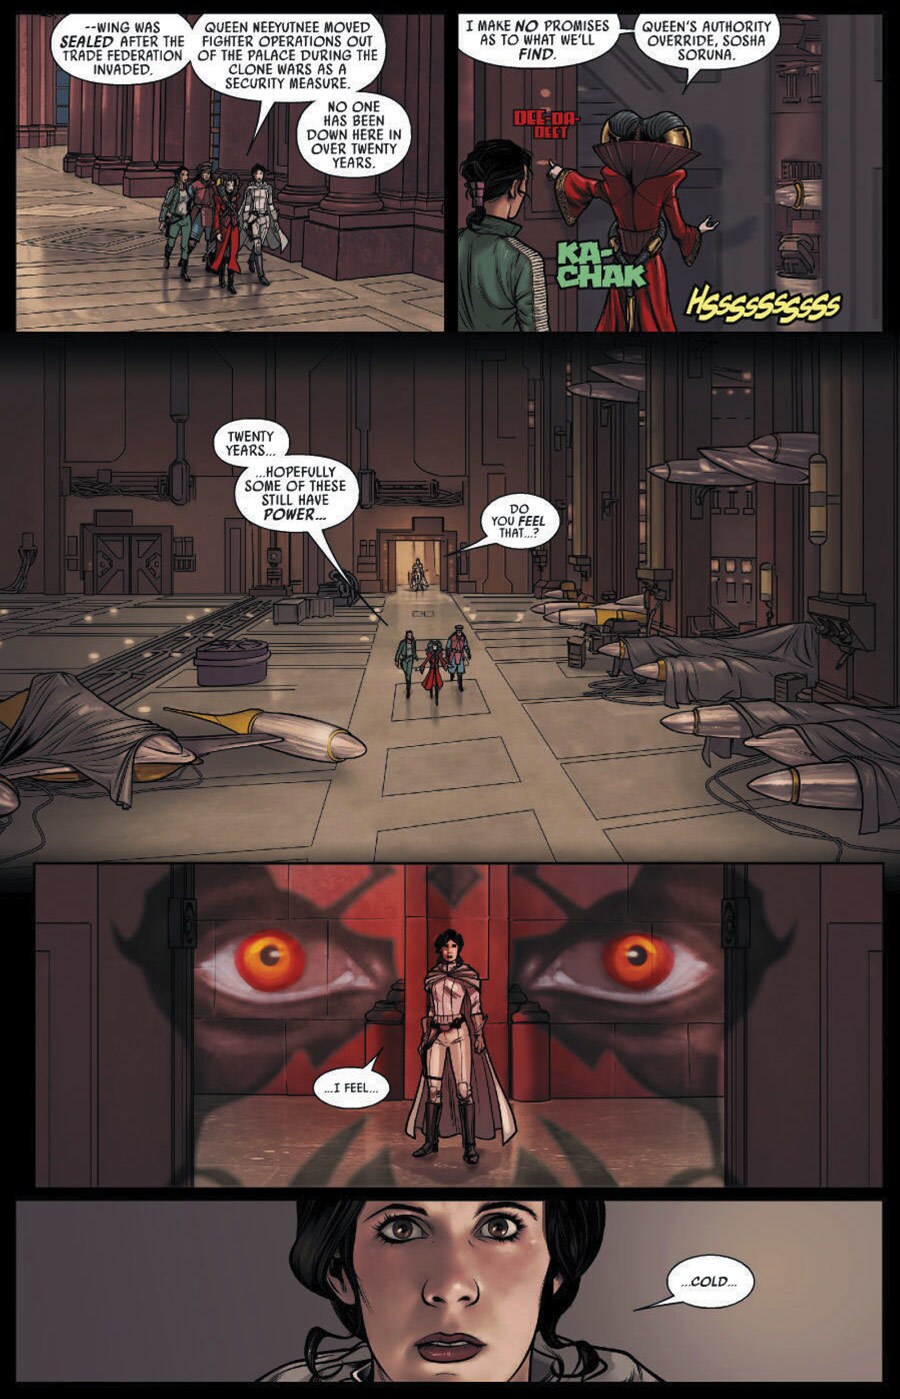 In a series of comic book panels, Queen Soruna is shown leading Princess Leia and Shara Bey through a hangar of old starfighters where Princess Leia senses the presence of Darth Maul.